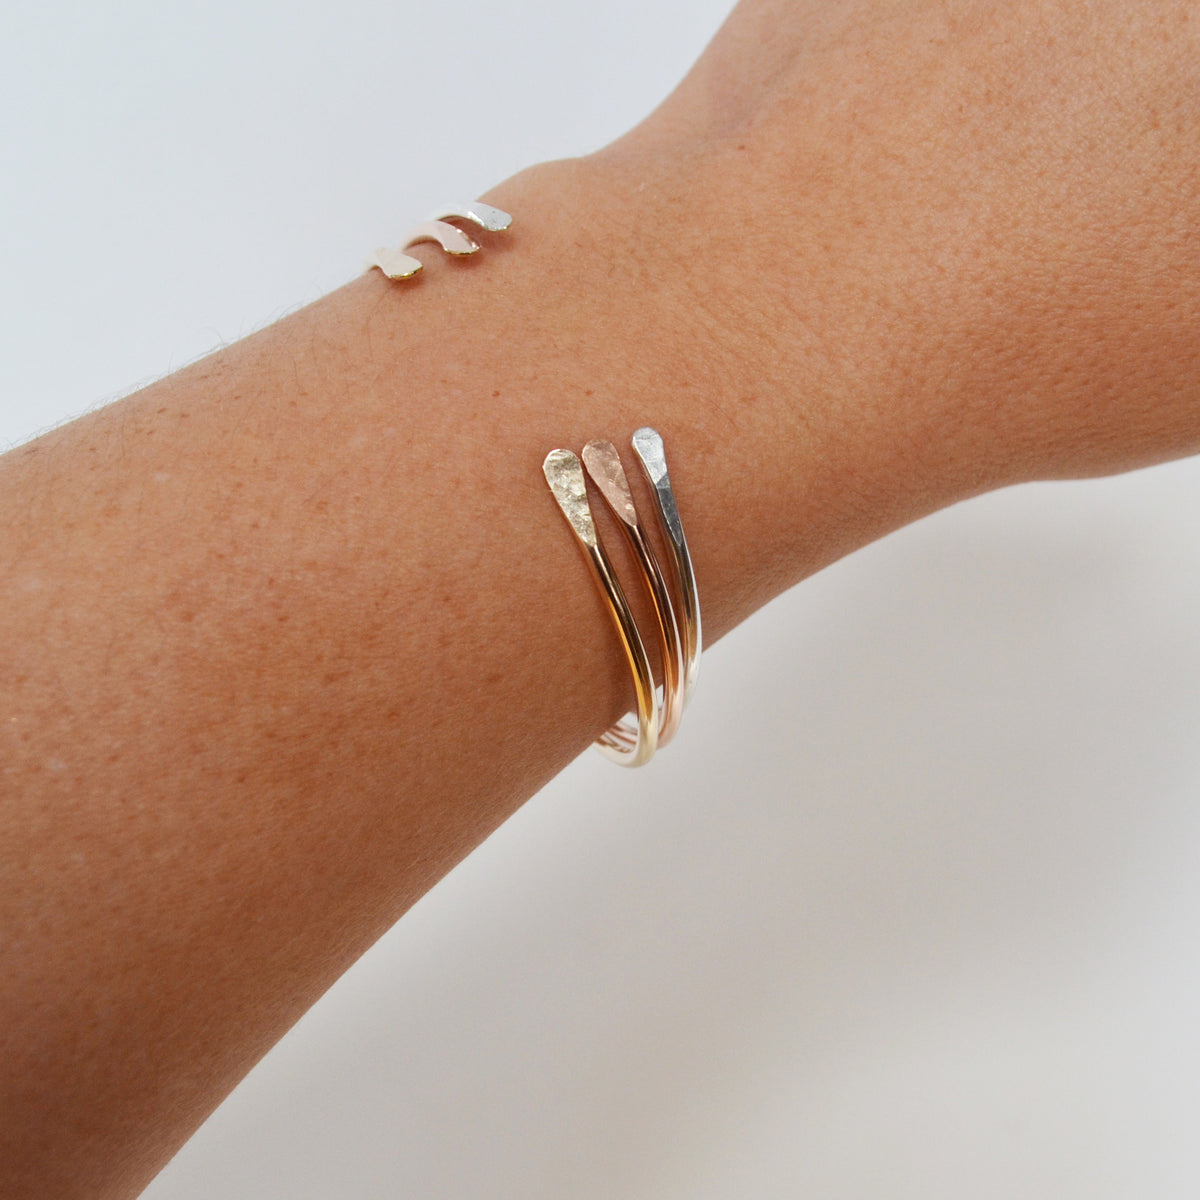 Simple Cuff Bracelet, Gold, Rose Gold, or Silver